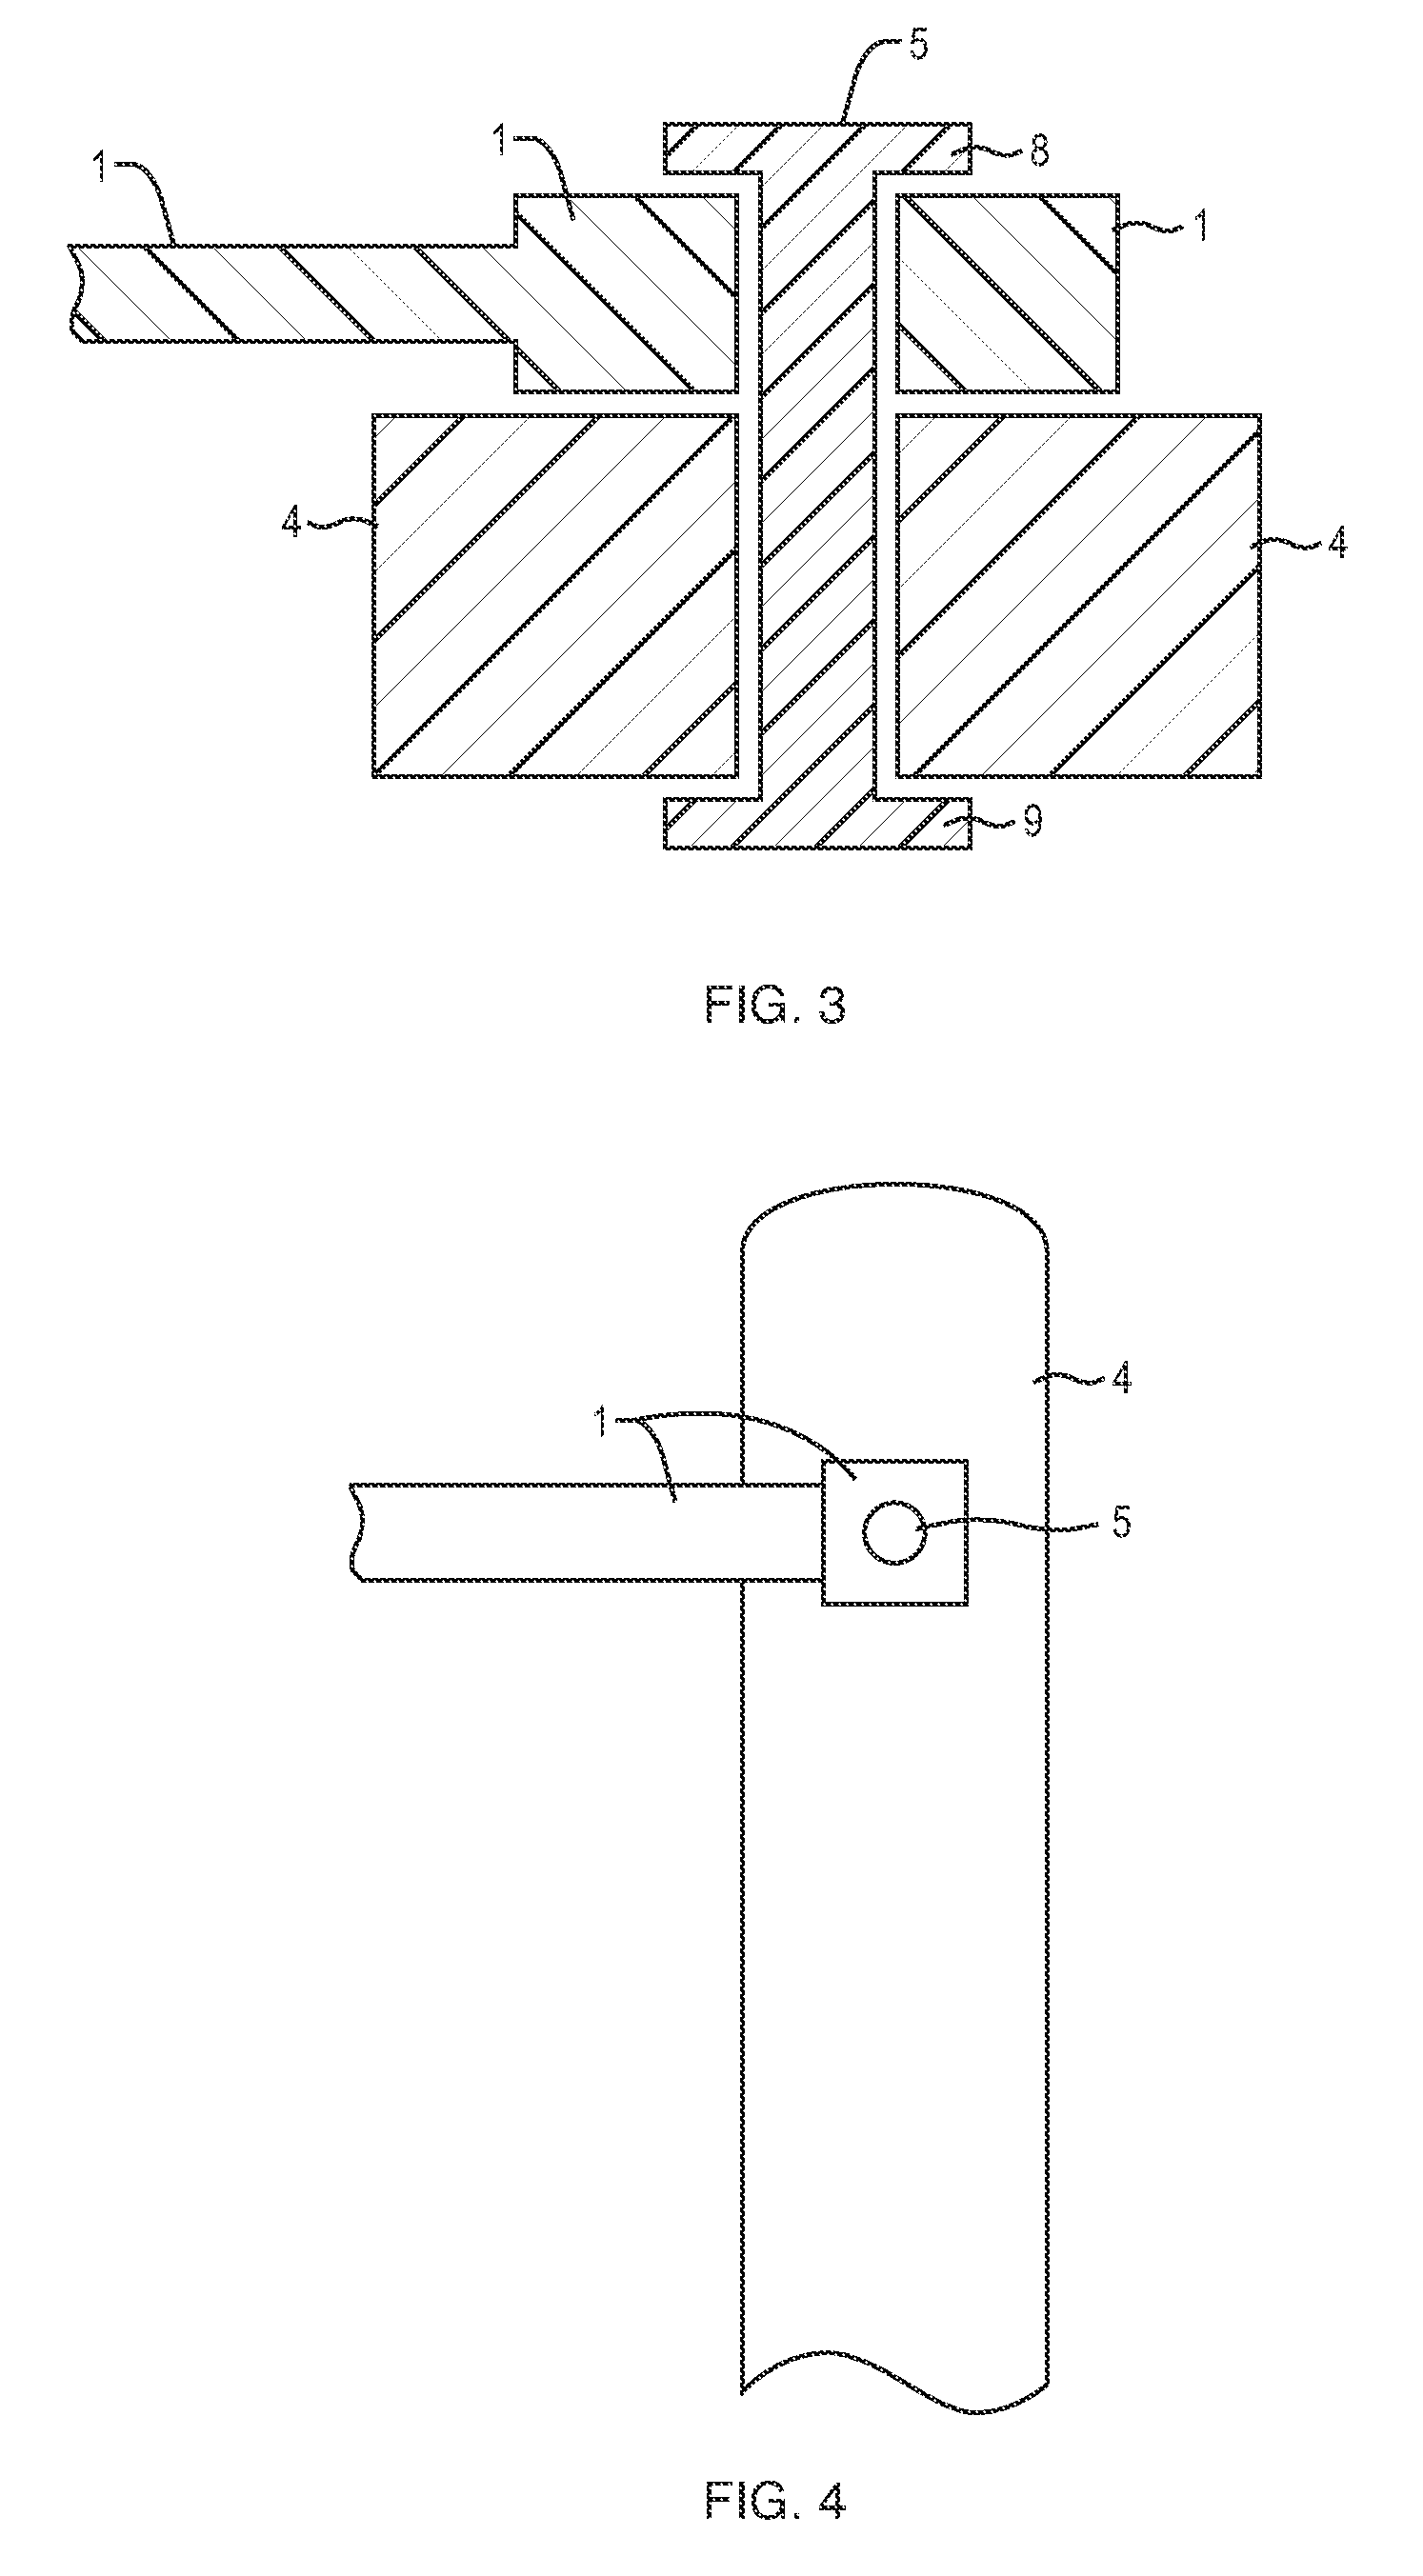 Methods and Apparatus for Manufacturing a Computer Without Assembly